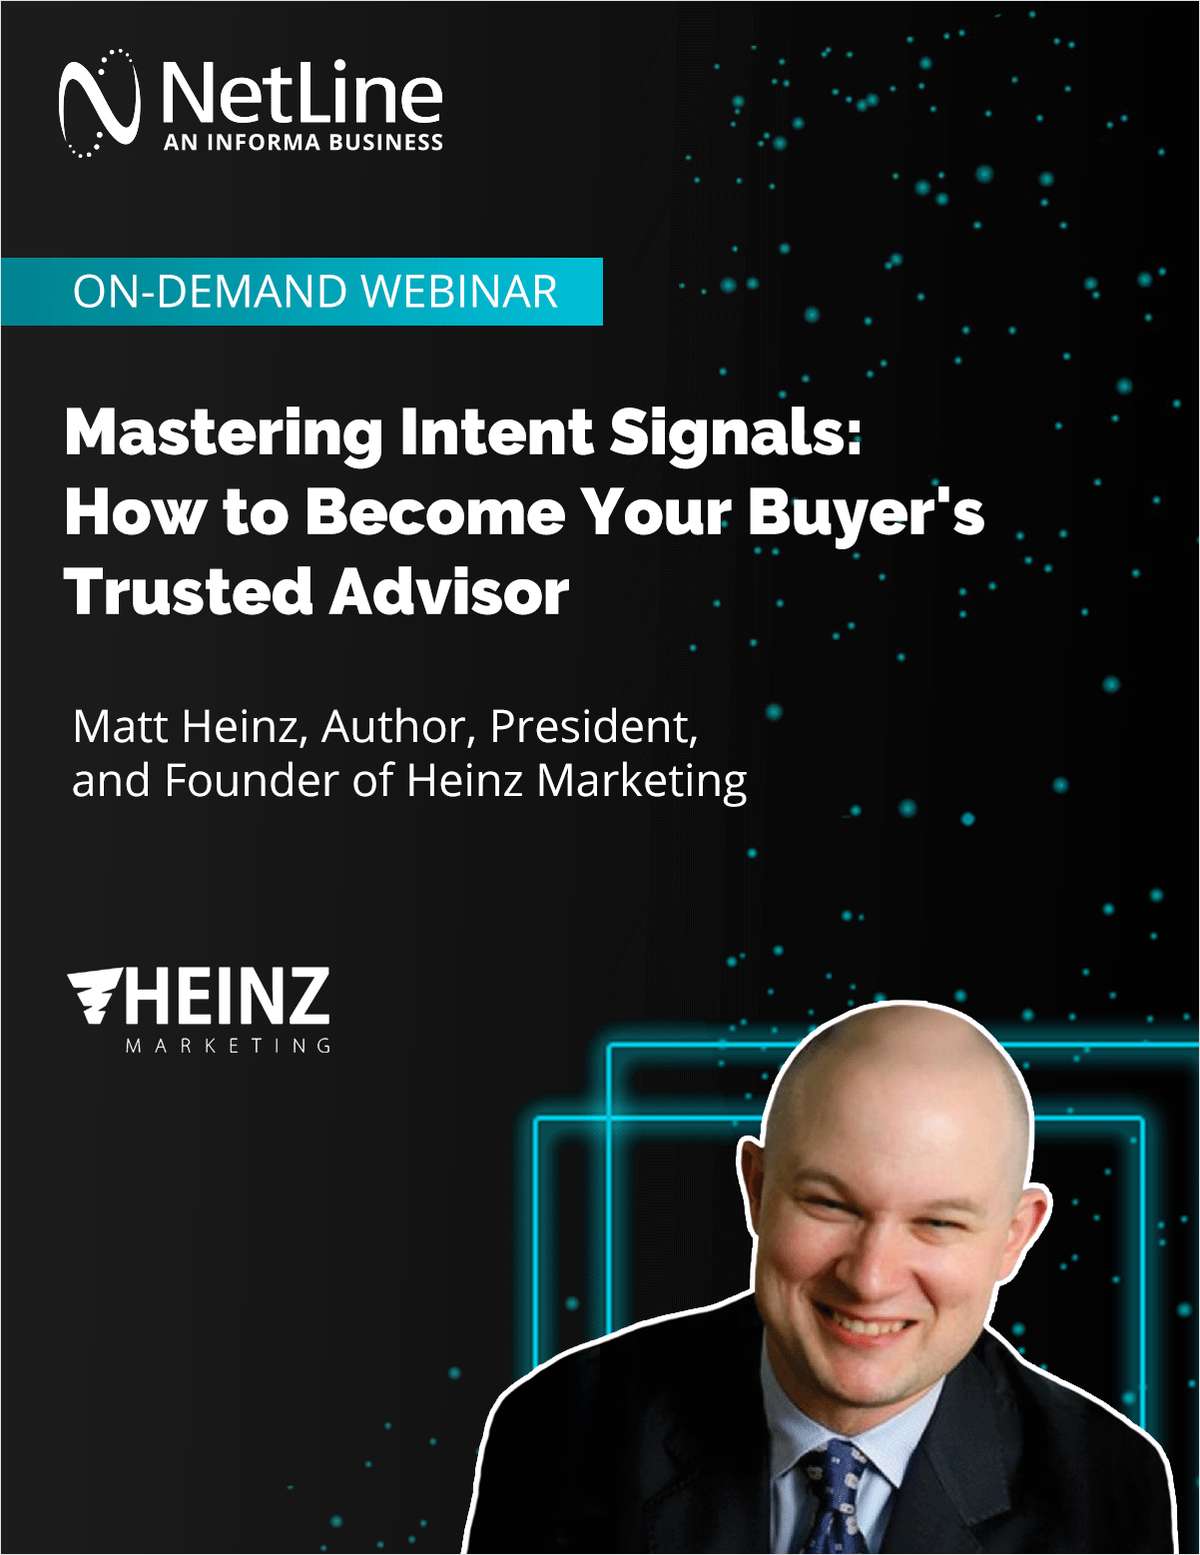 Mastering Intent Signals: How to Become Your Buyer's Trusted Advisor